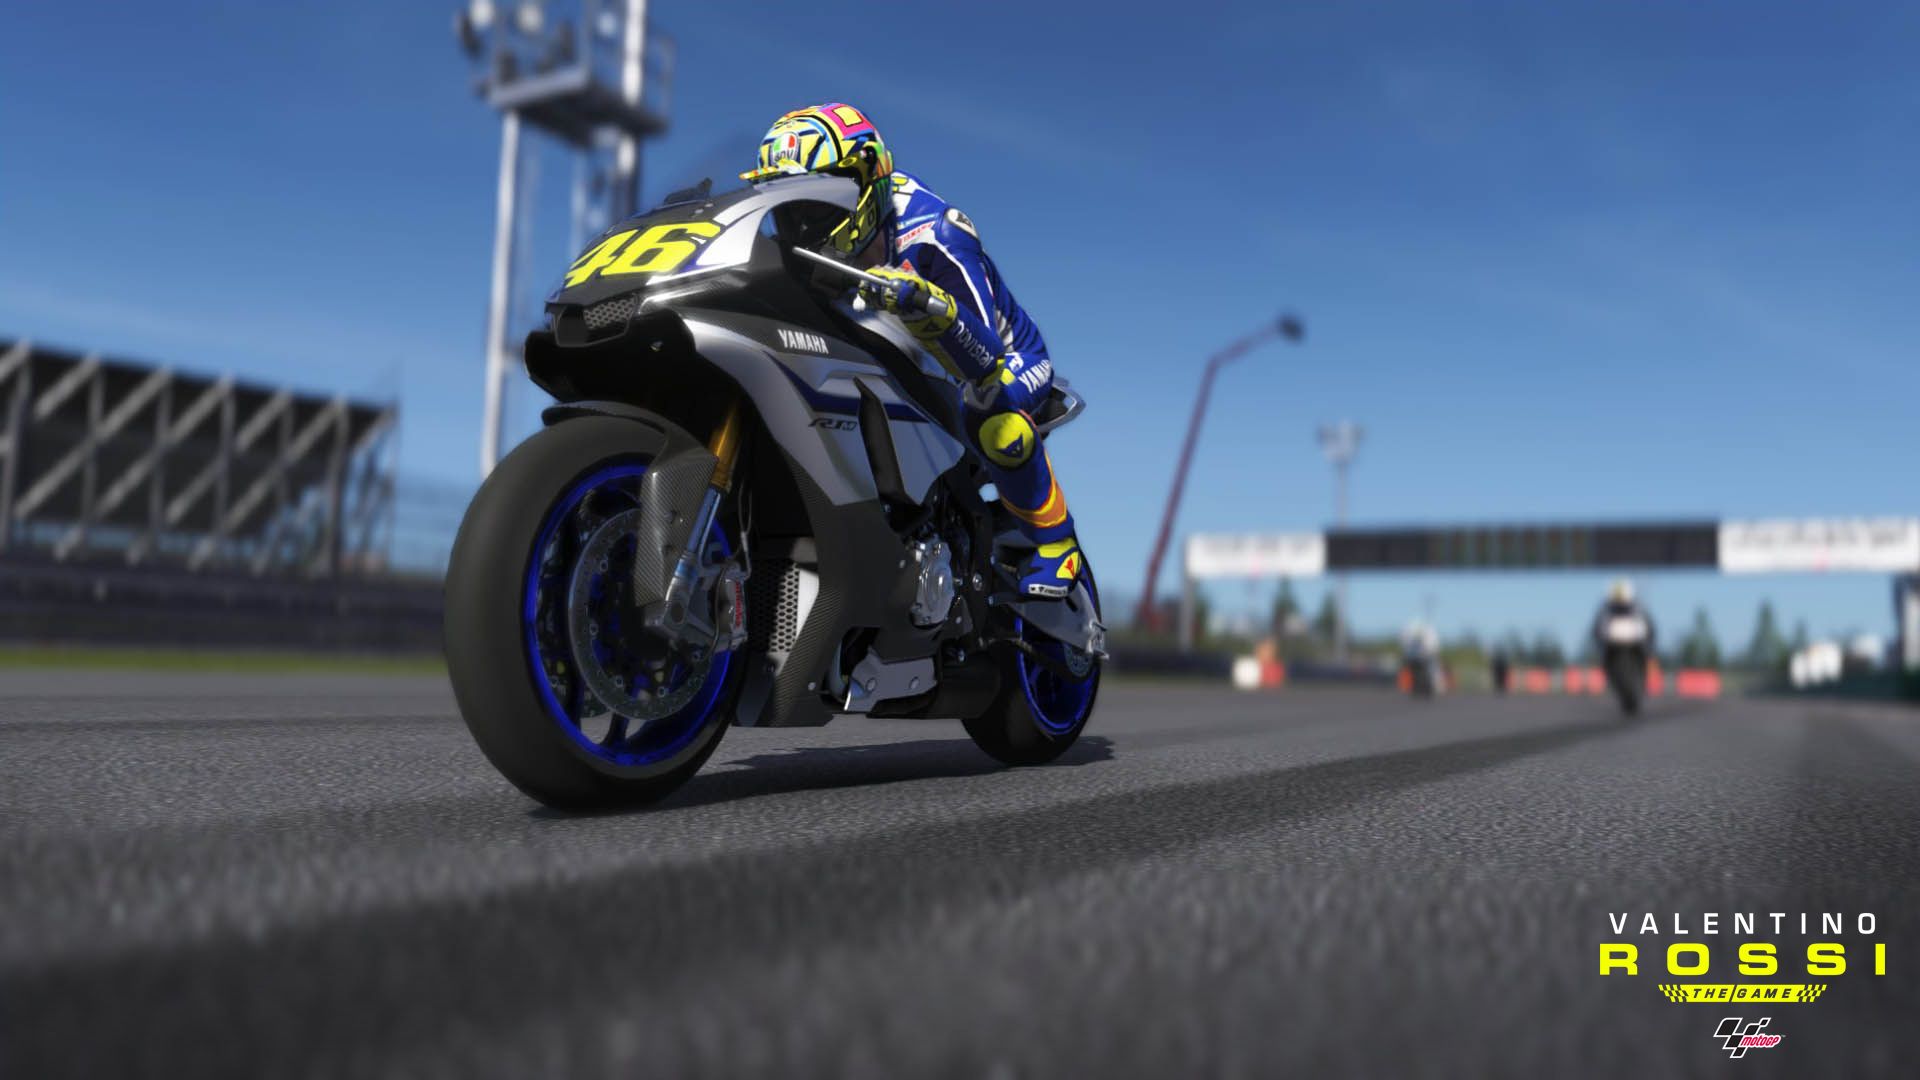 Save 90% on Valentino Rossi The Game on Steam